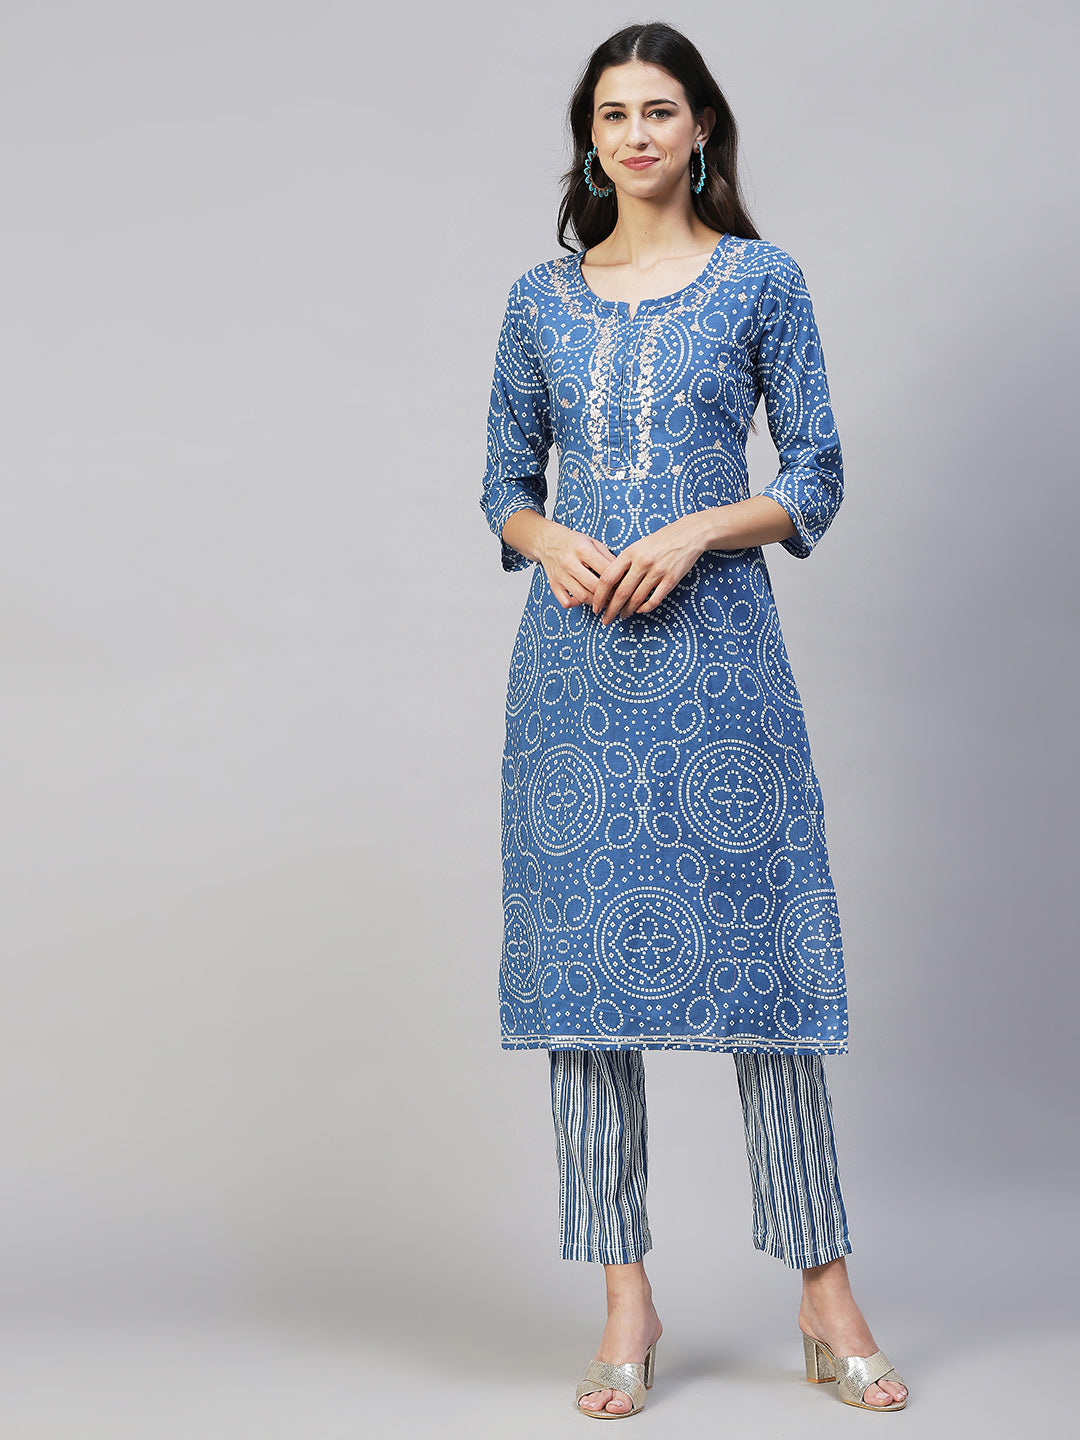 Bandhani Printed & Embroidered Straight Fit Kurta with Pants - Blue